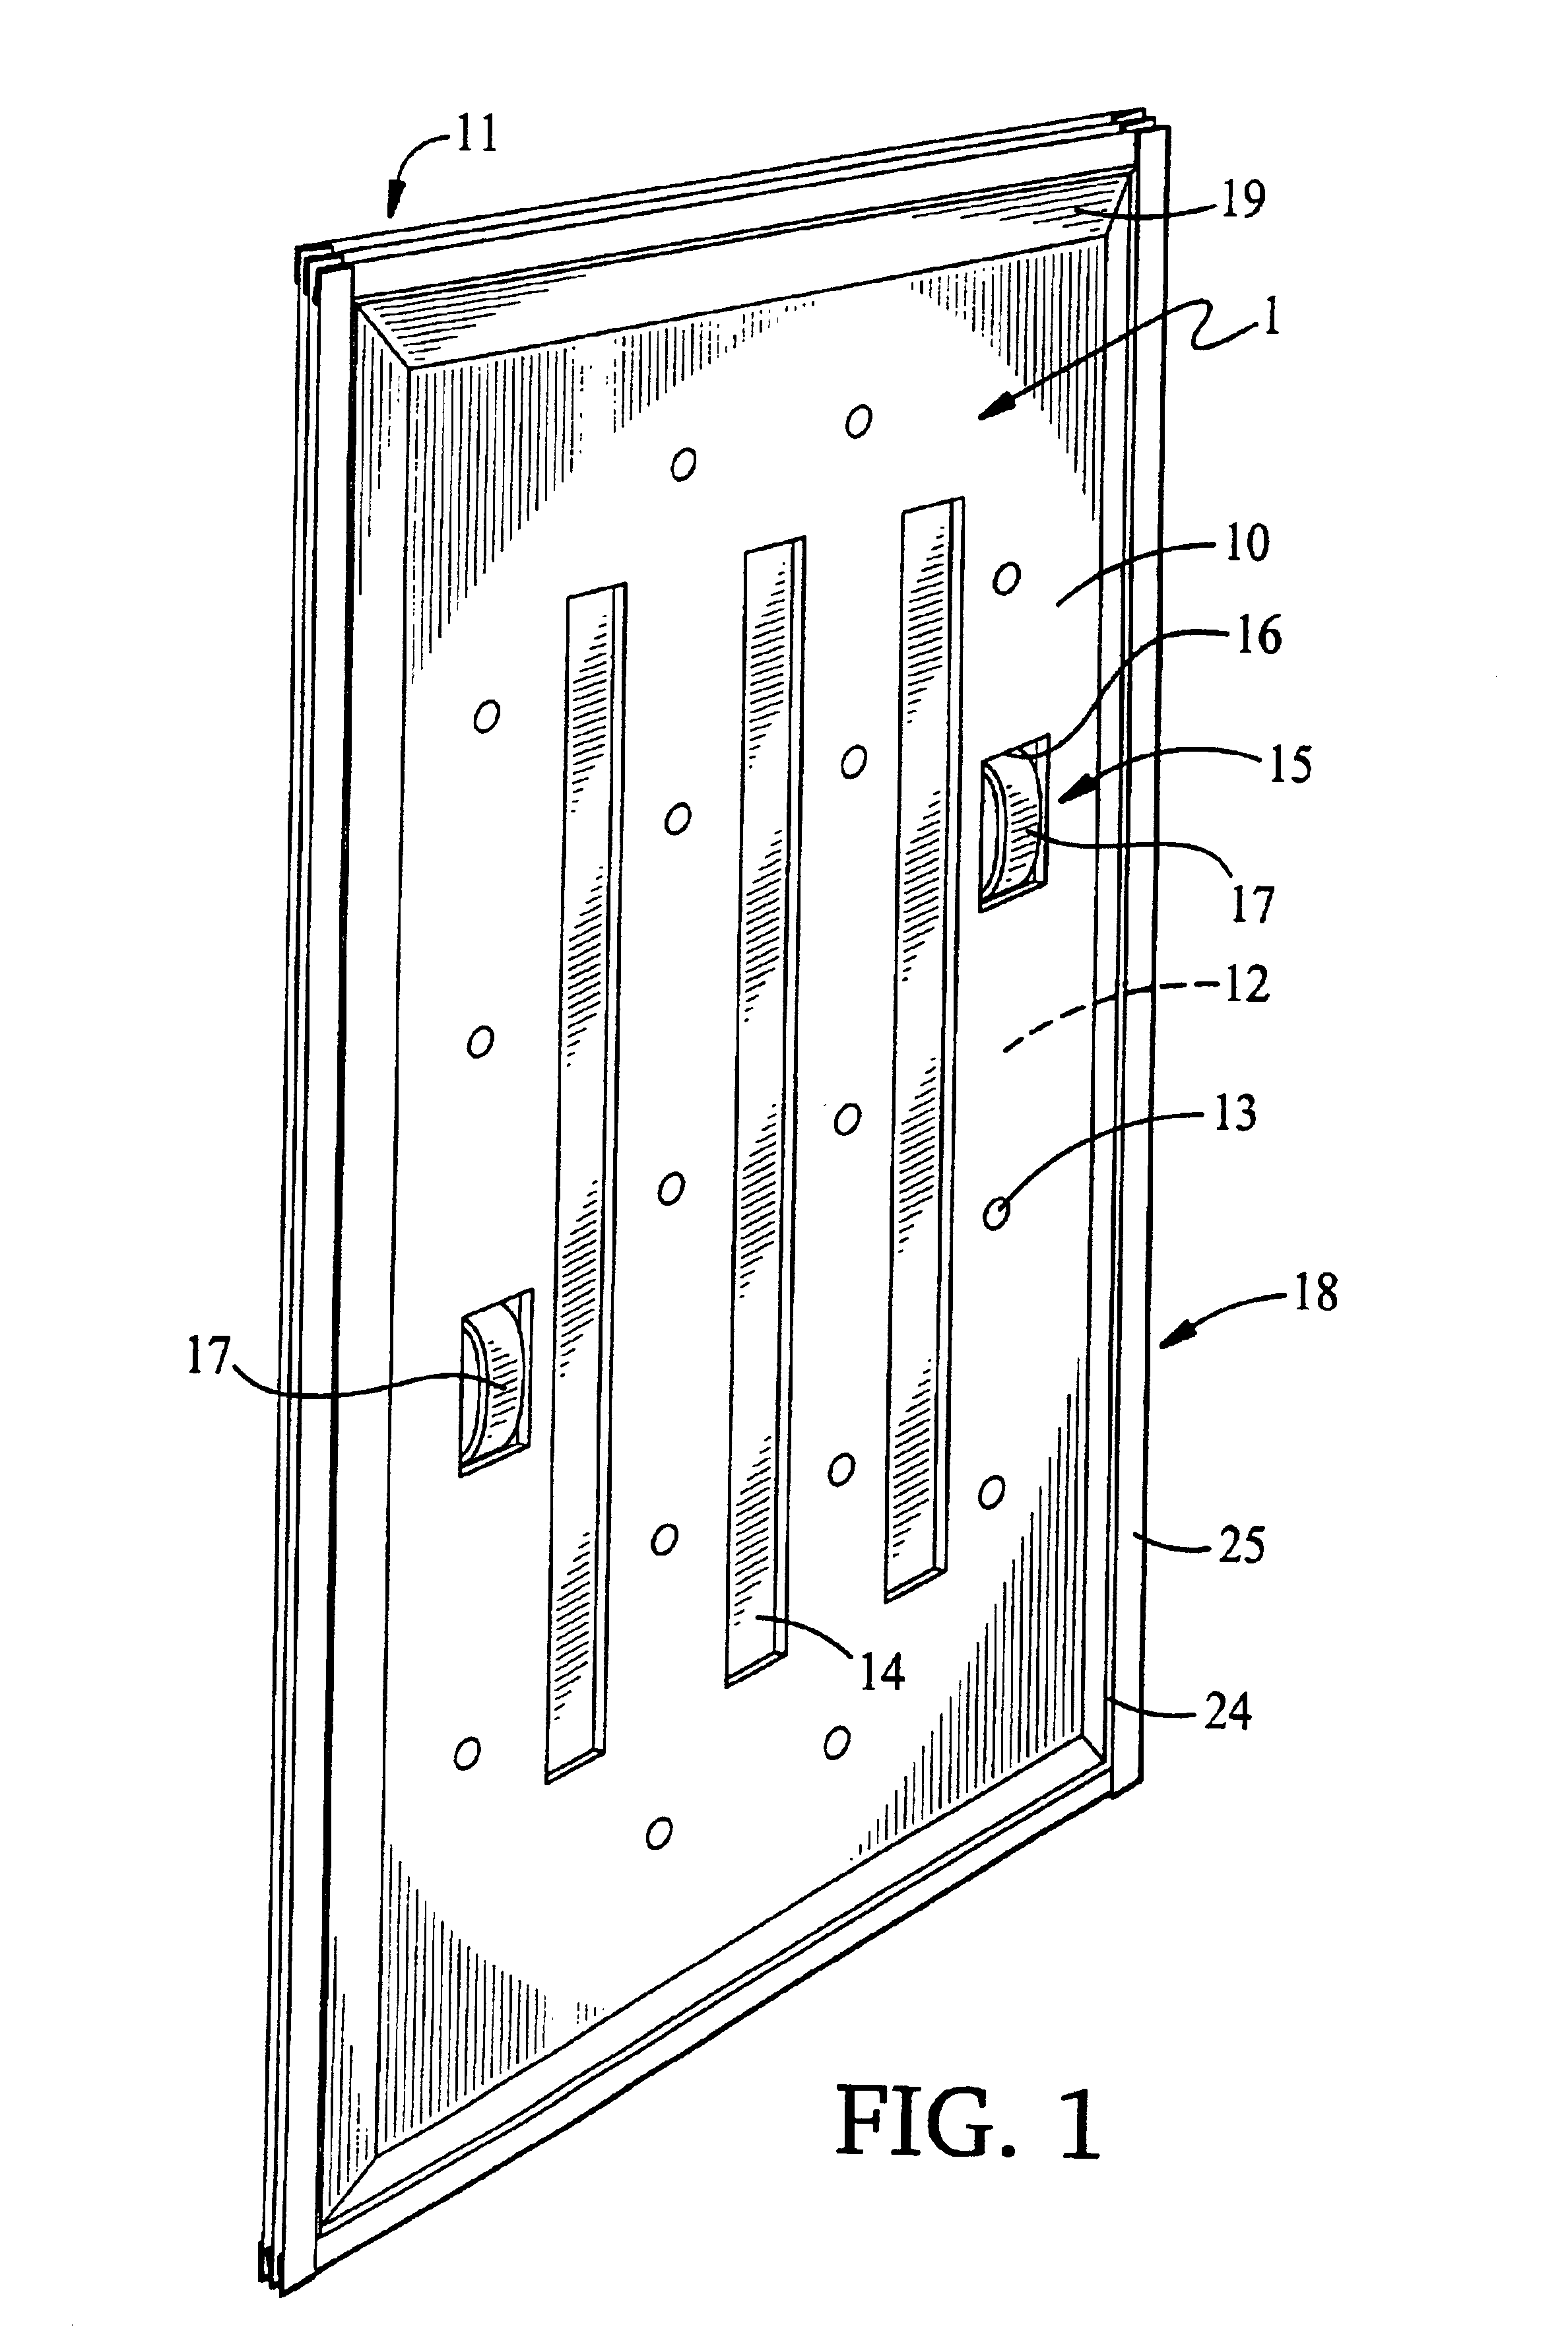 Bulkhead and partition systems